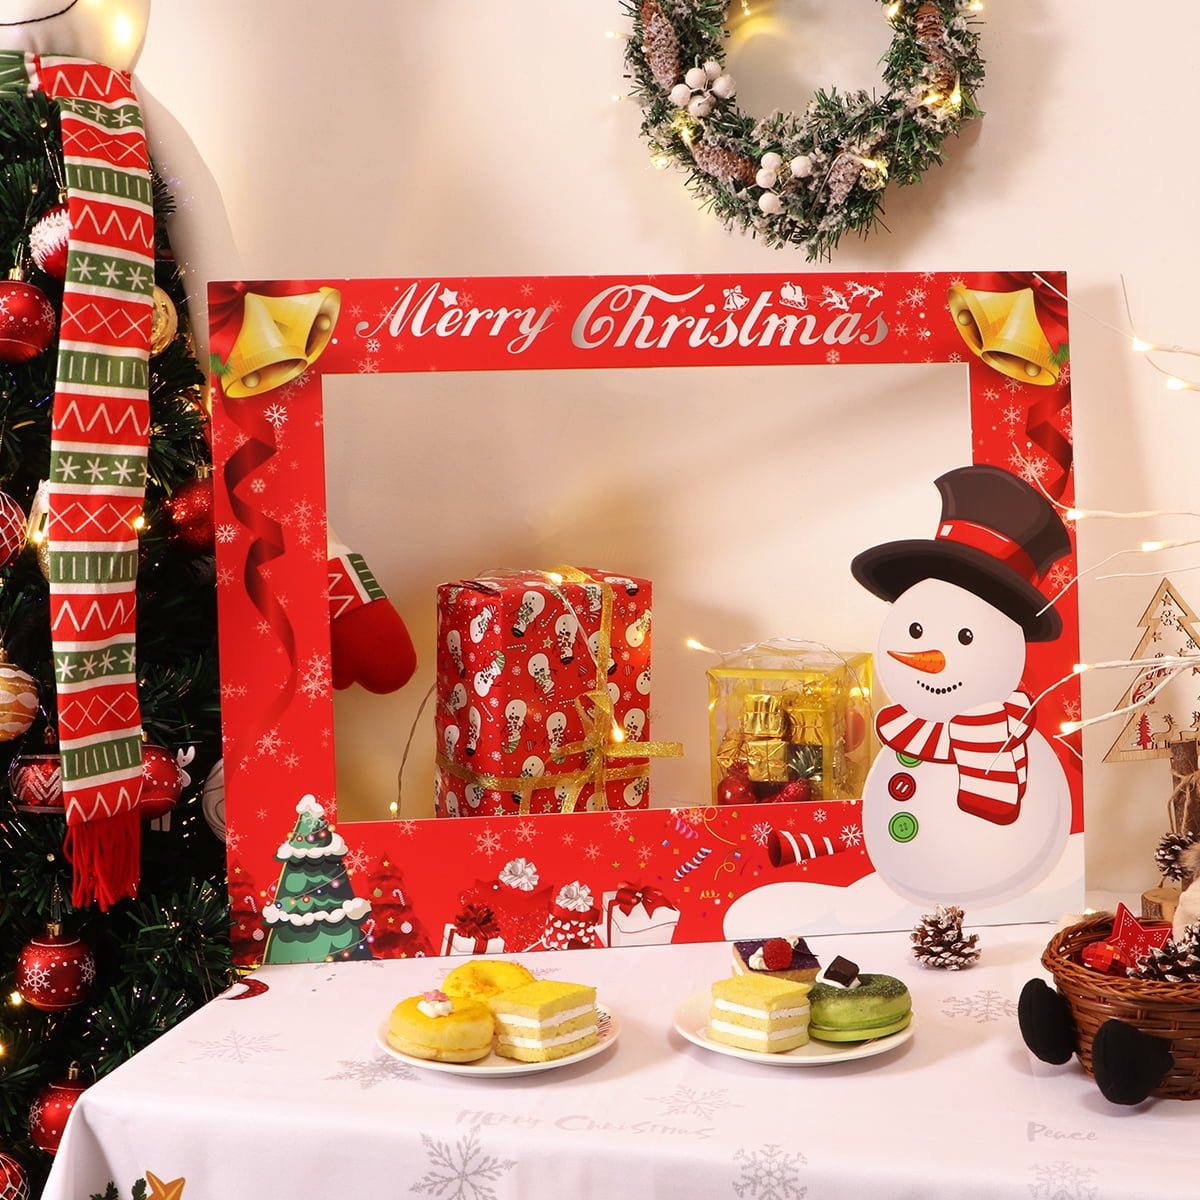 chaoshihui Christmas Decorations New Years Photo Booth Props